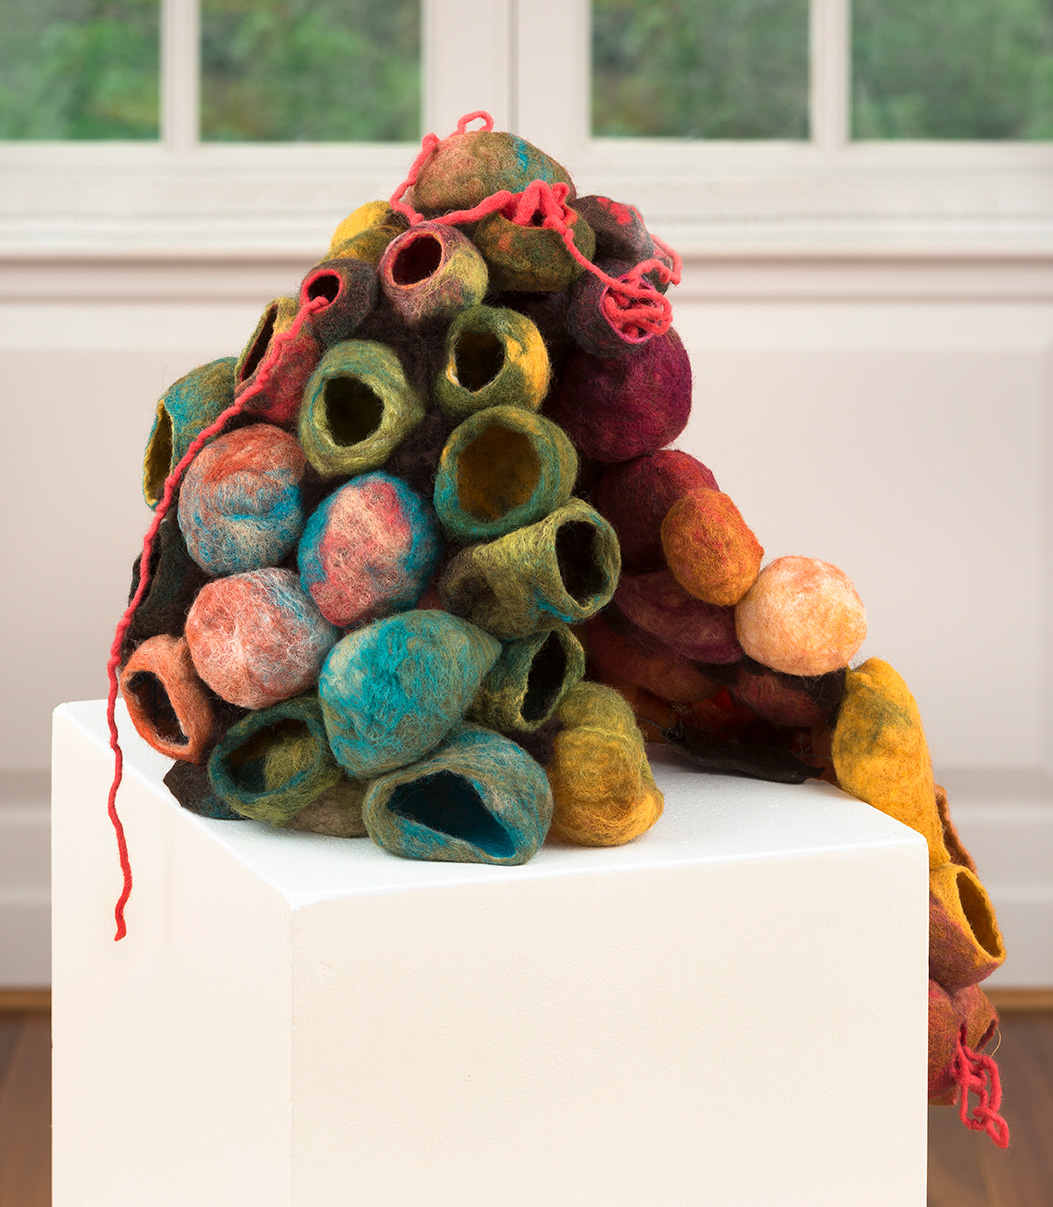 Nesting Instincts sculpture by emerging artist Emily Hoxworth